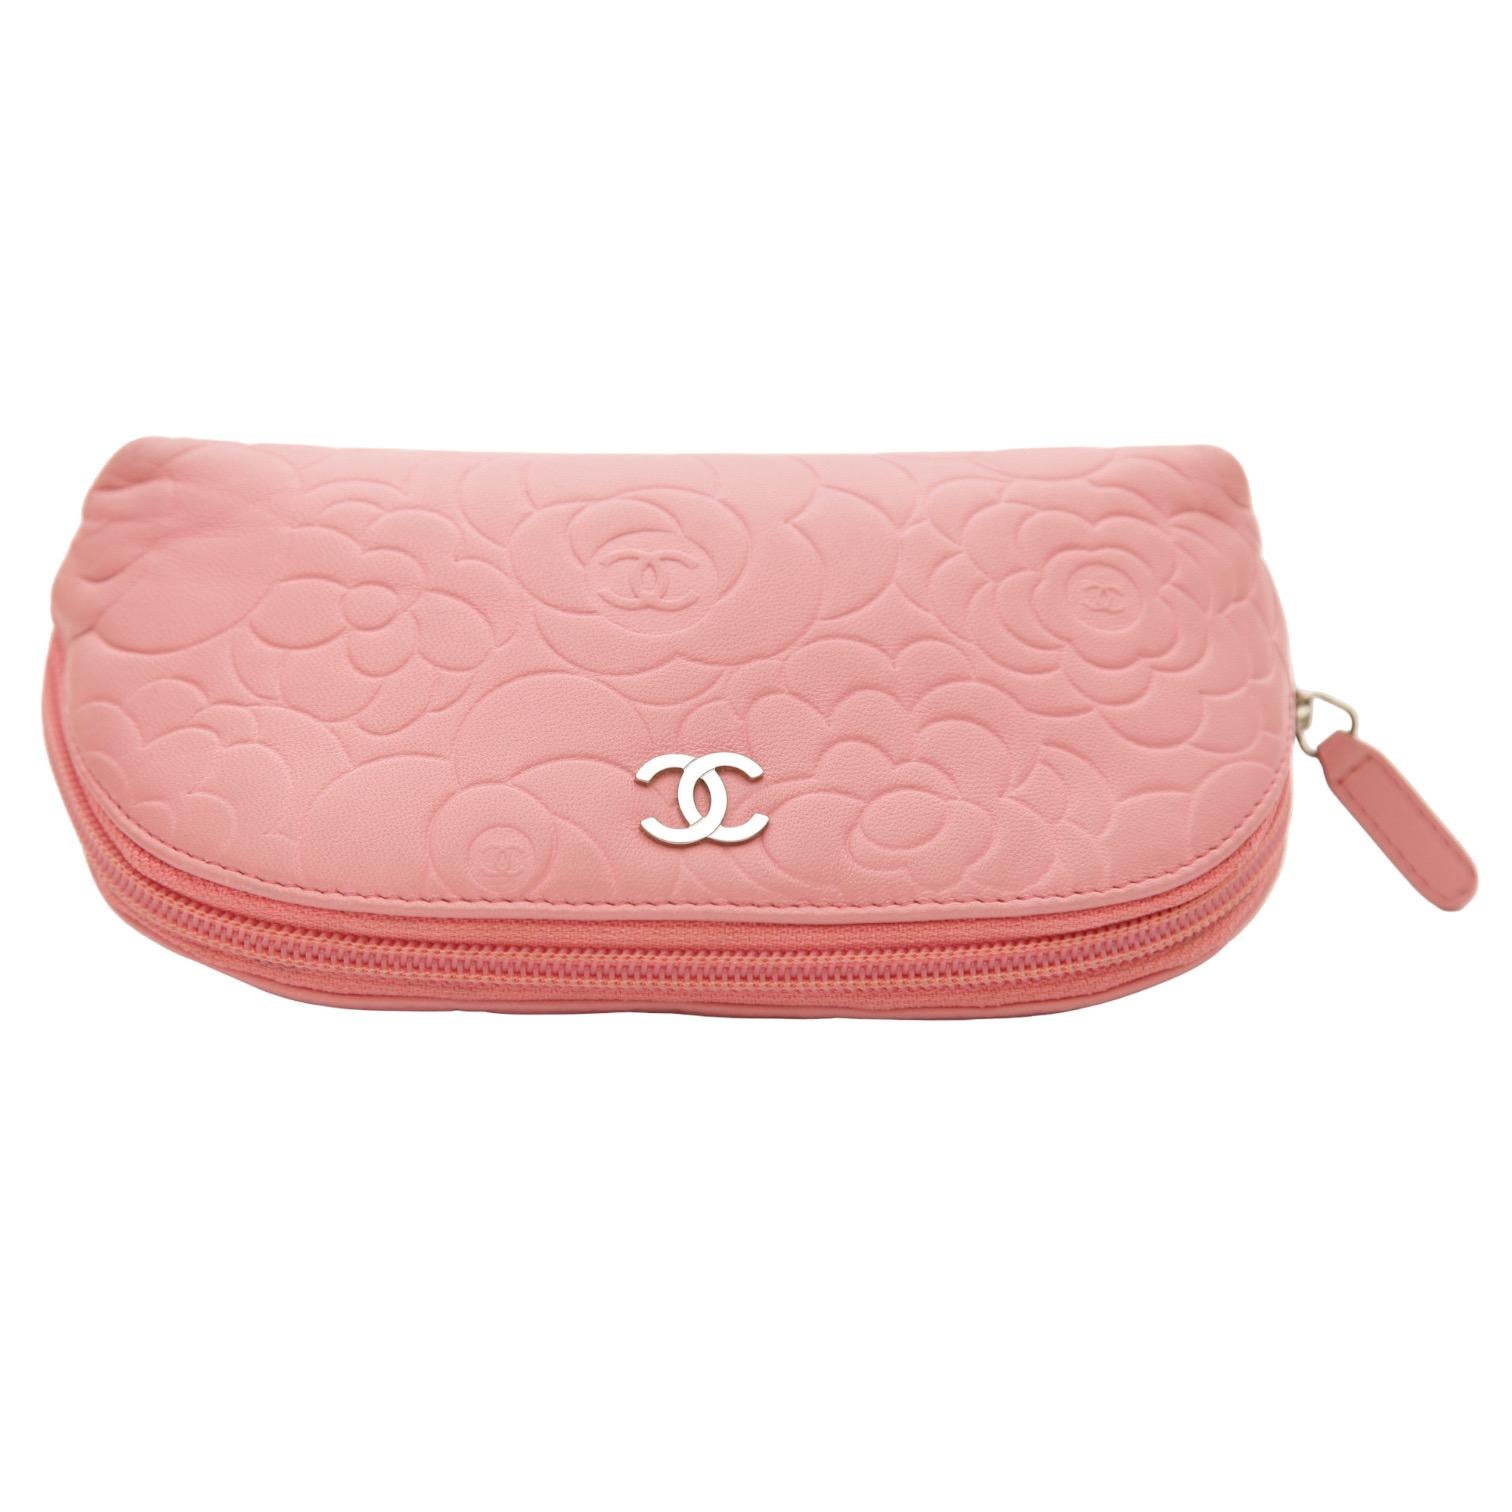 CHANEL Pink Lambskin Leather Camellia Cosmetic Pouch Case Bag Silver CC Zipper In Fair Condition In Hollywood, FL